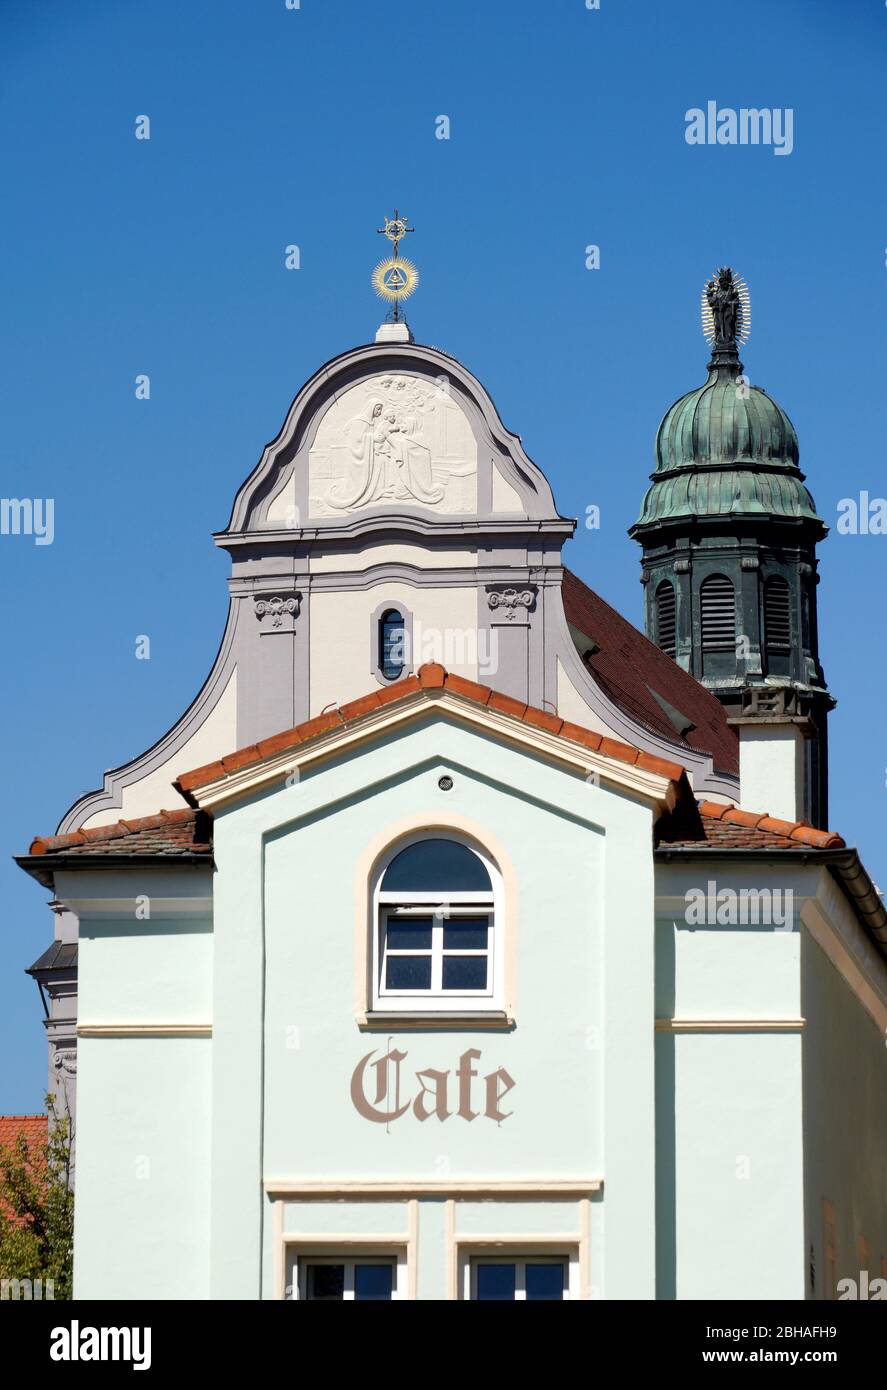 Germany, Bavaria, Upper Bavaria, Altötting, St. Anna's Basilica, church tower with statue of Mary and baby Jesus, front facade with relief image of the patron saint of St. Anne with Mary and baby Jesus, in the foreground a cafe Stock Photo